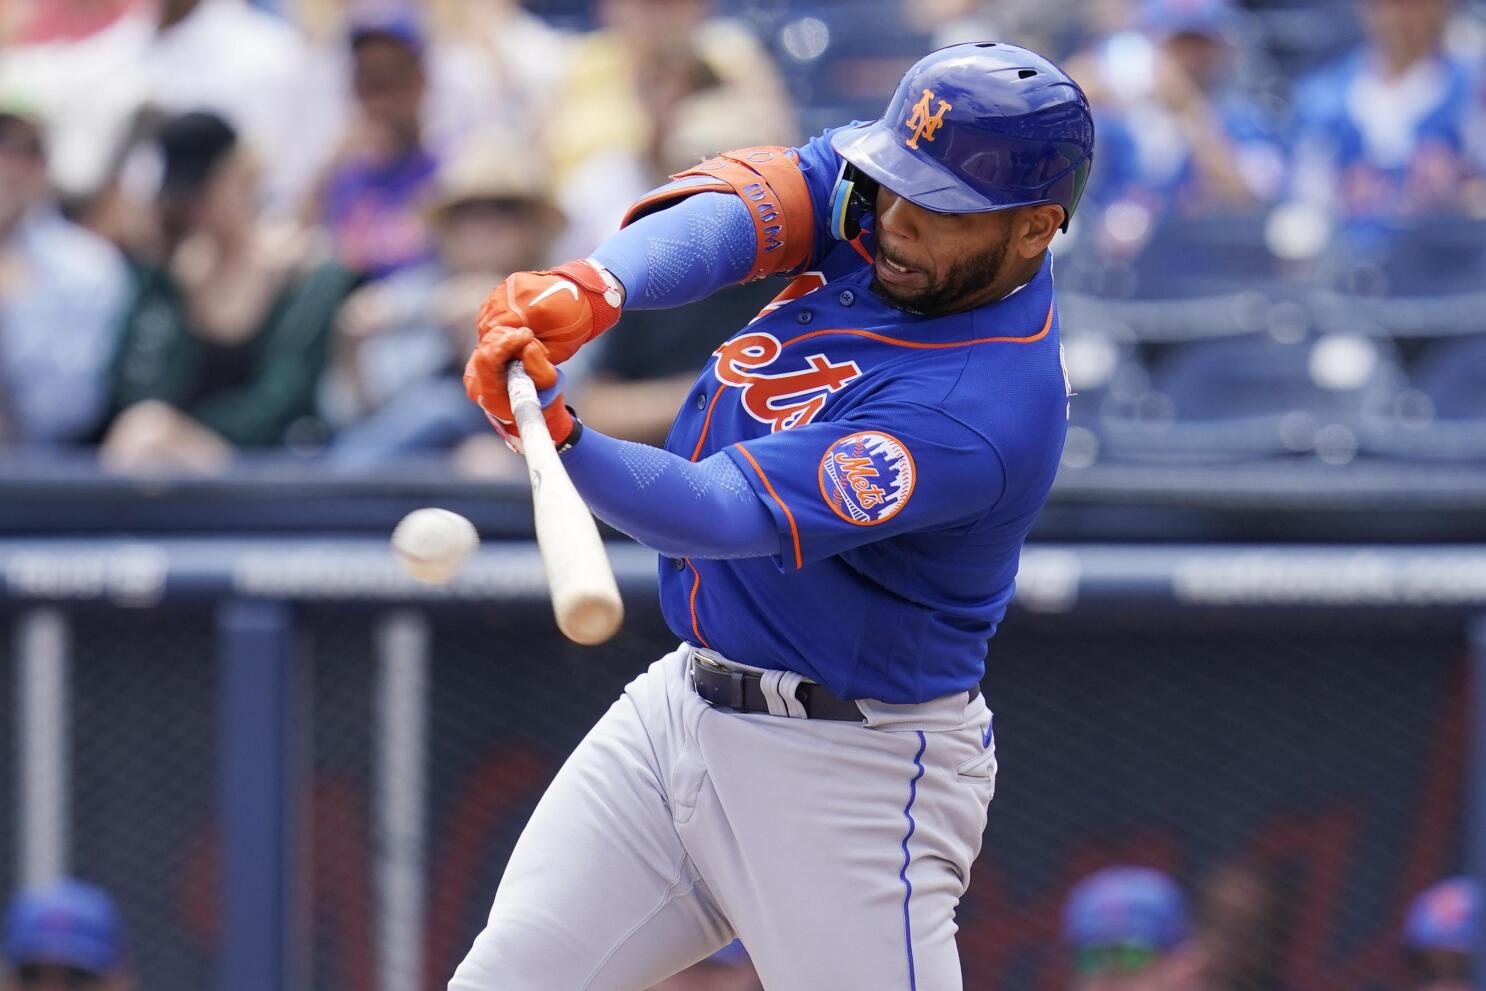 After being beaned in head, Mets outfielder will undergo tests